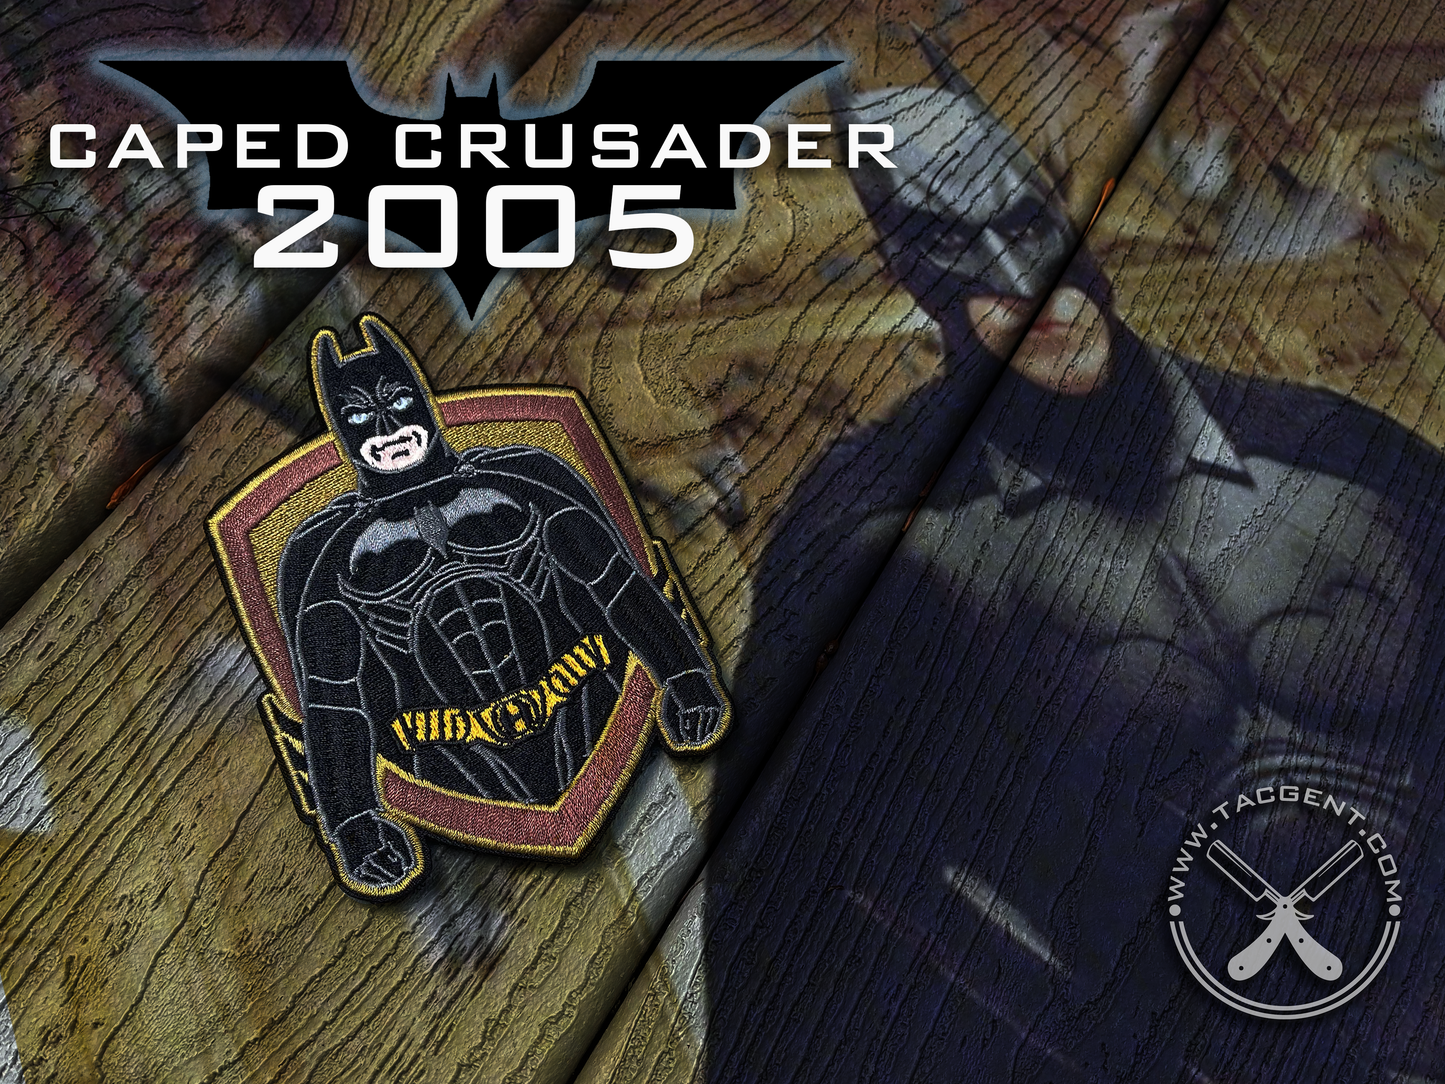 Caped Crusader 2005 Patch